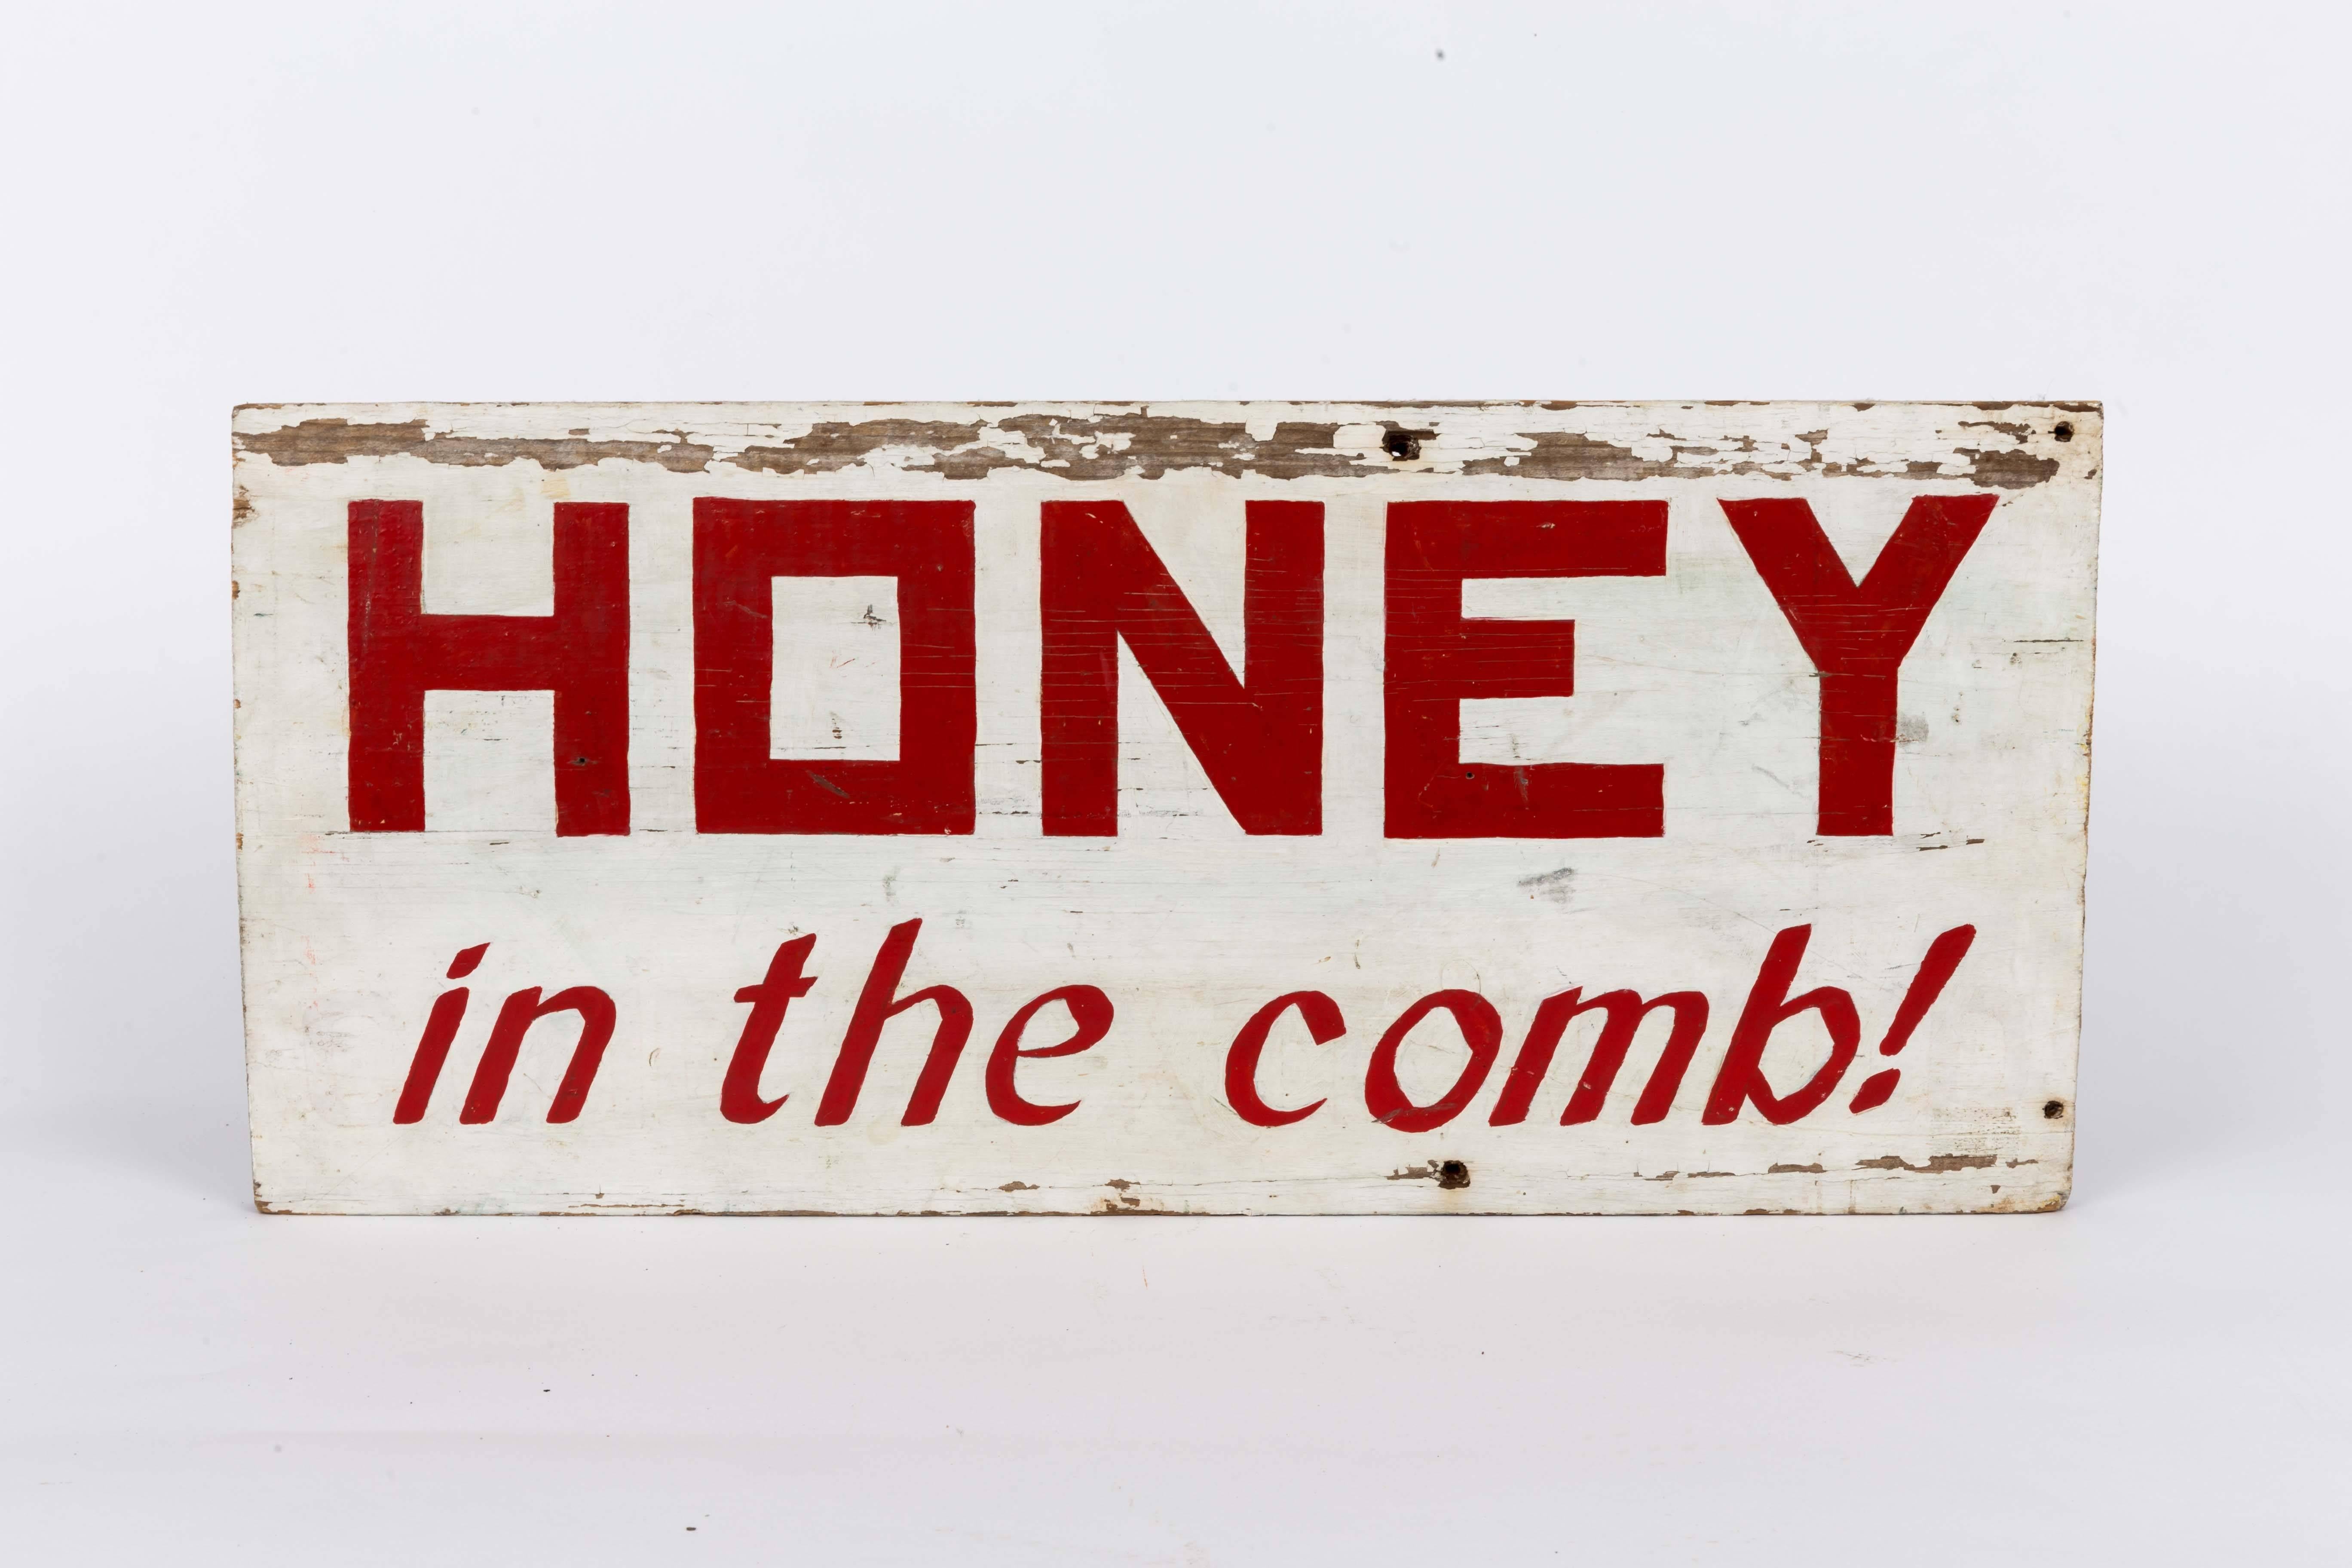 Vintage Honey in the Comb! sign, early 20th century.